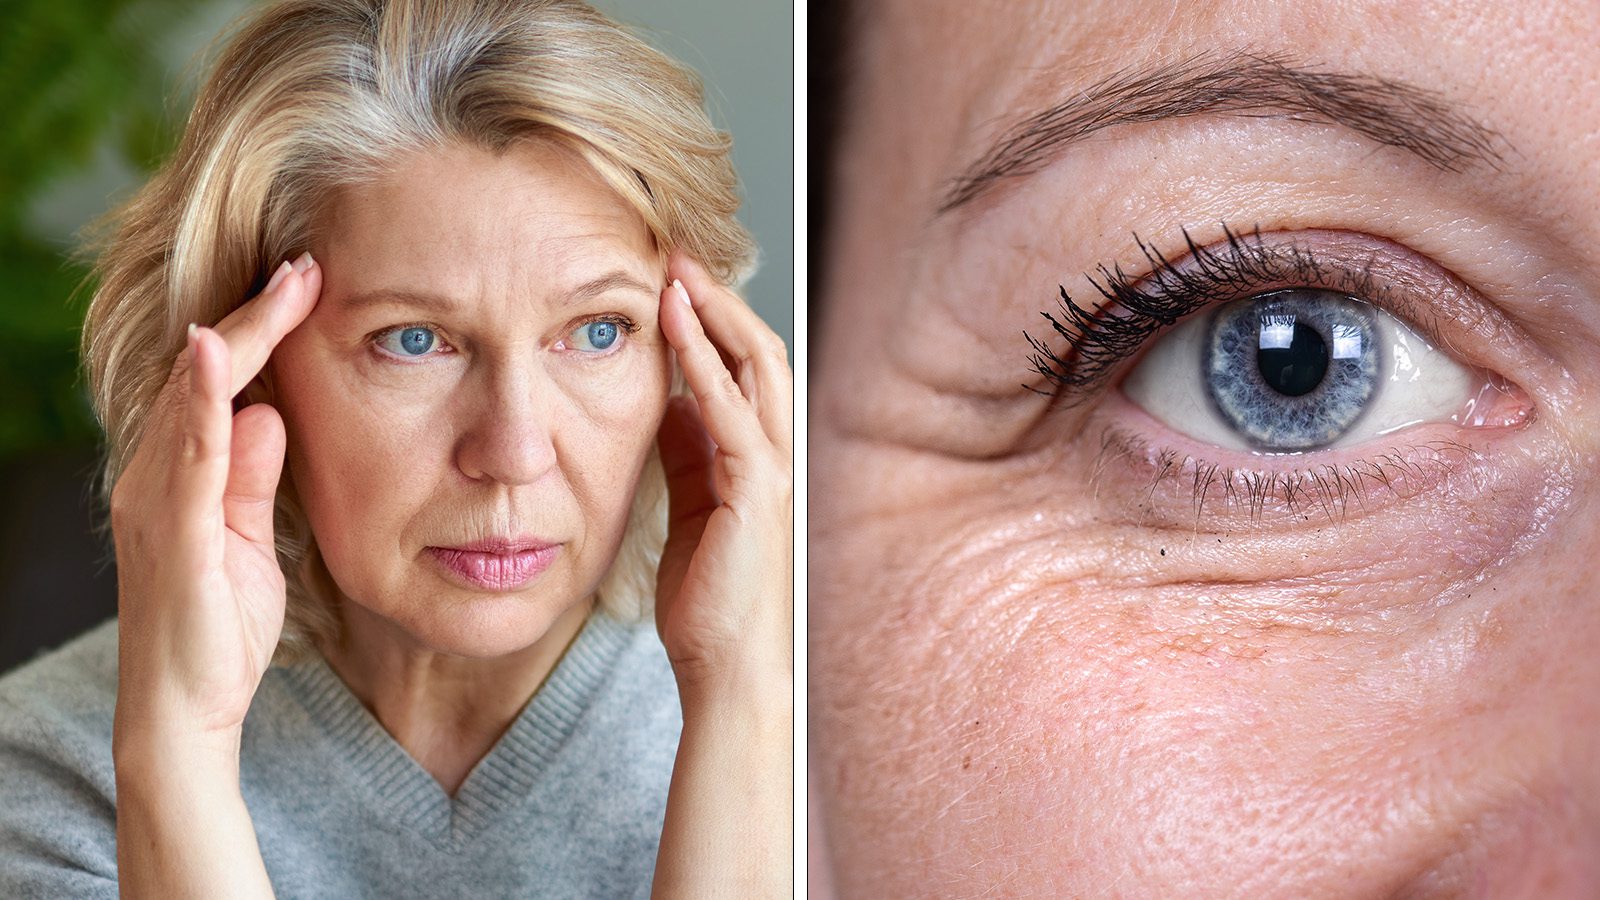 Science Explains the Link Between Stress and Wrinkles